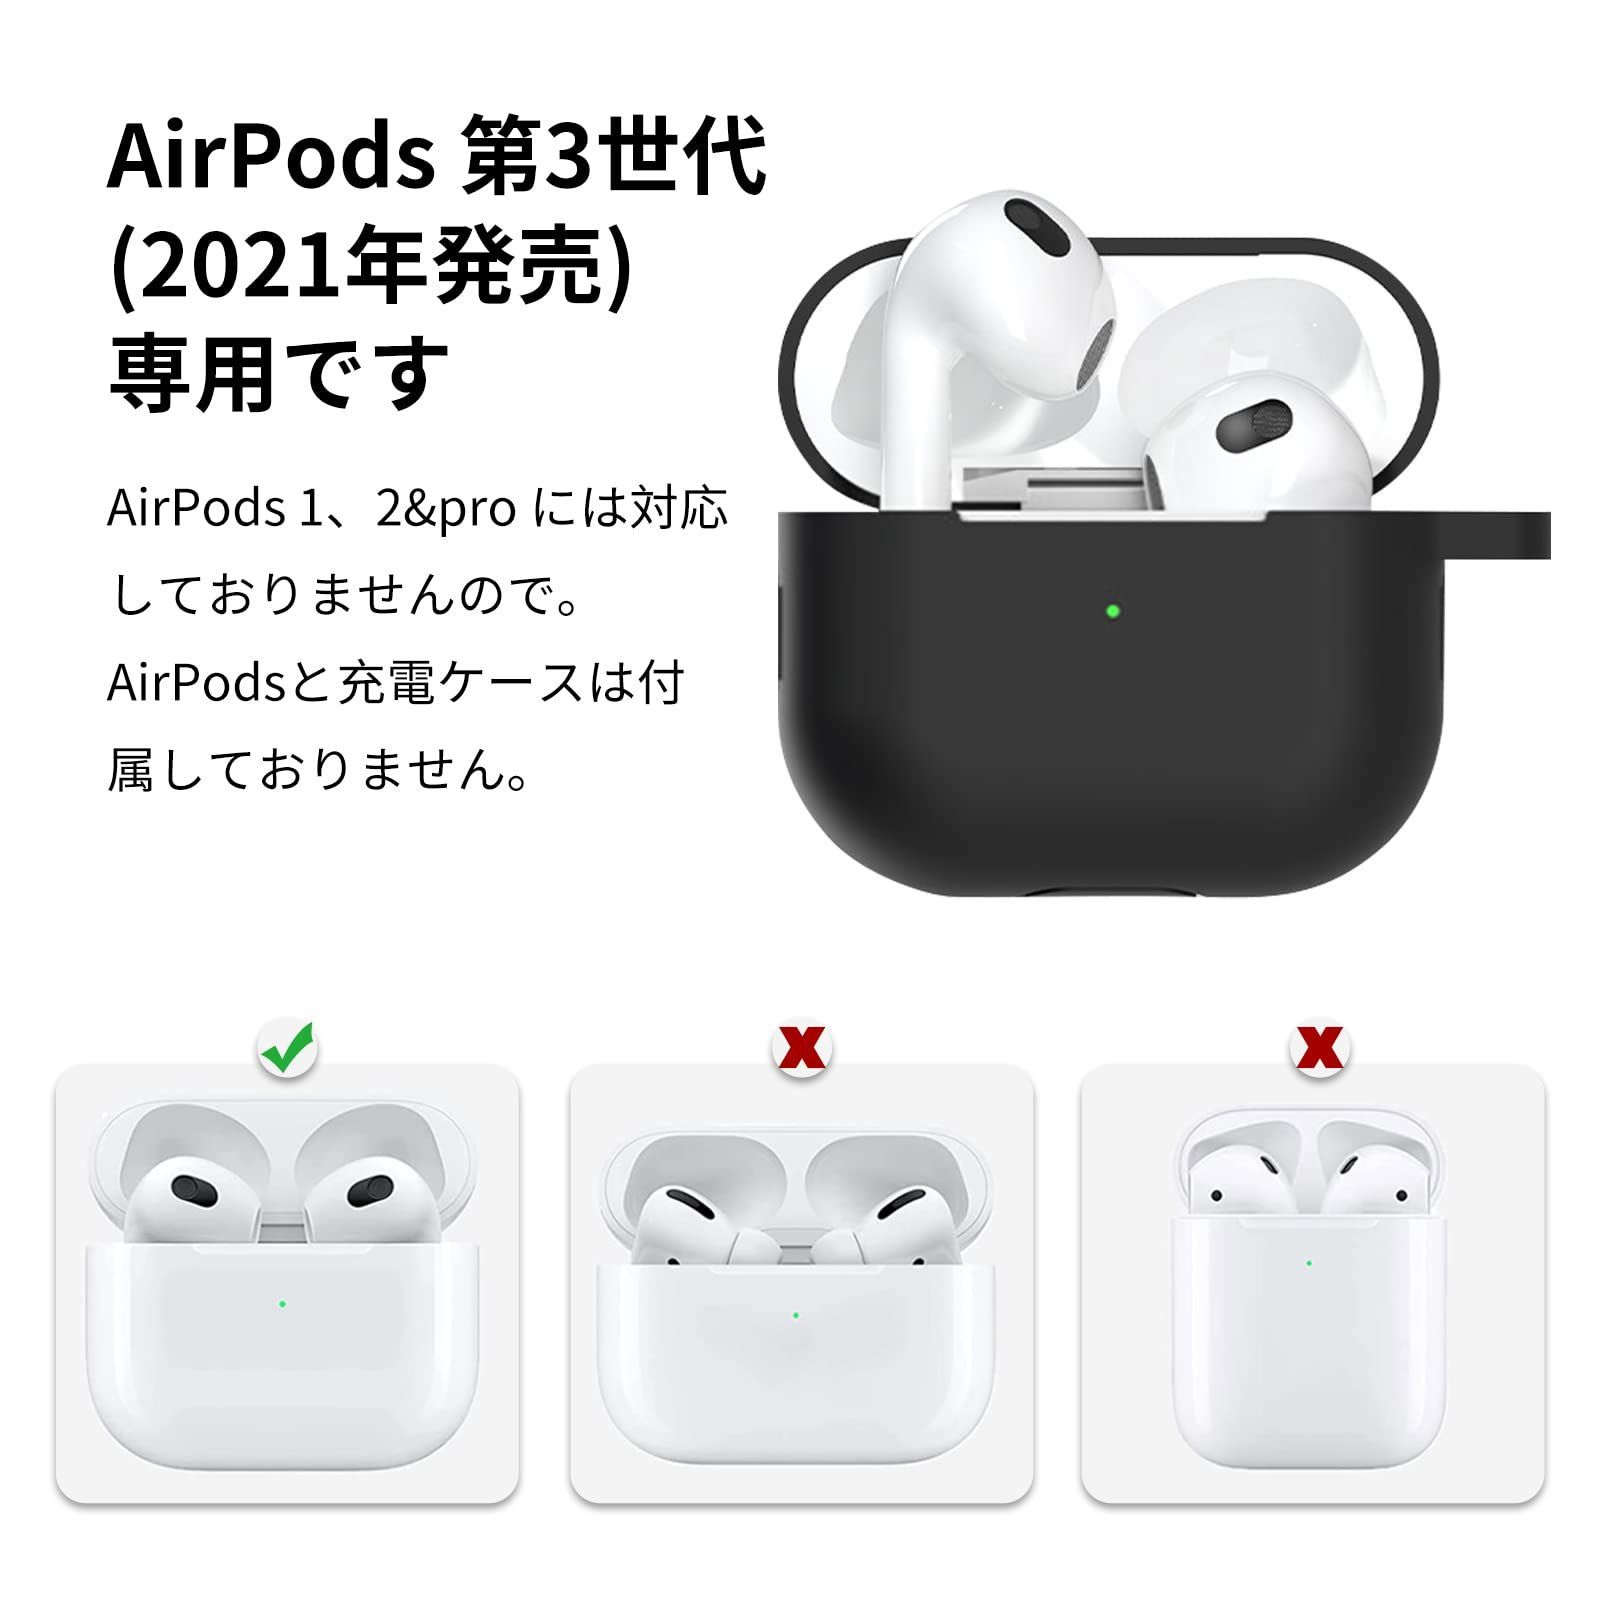 AirPods 用 ケース AirPods 第3世代 超極薄 シリコンケース